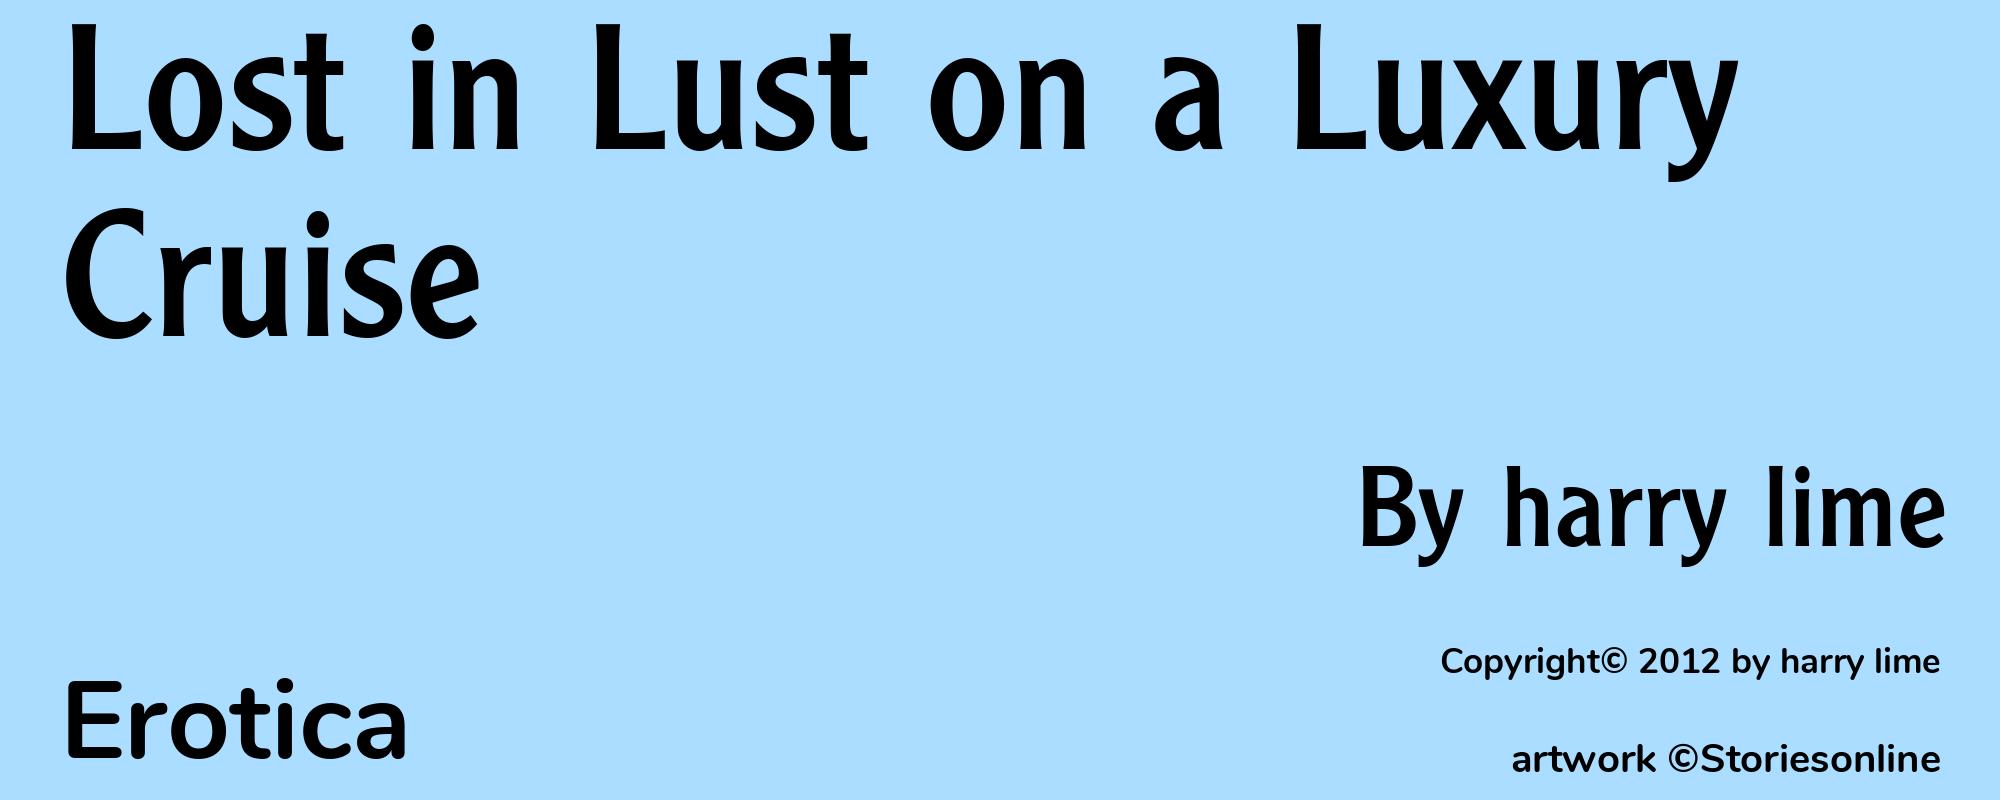 Lost in Lust on a Luxury Cruise - Cover